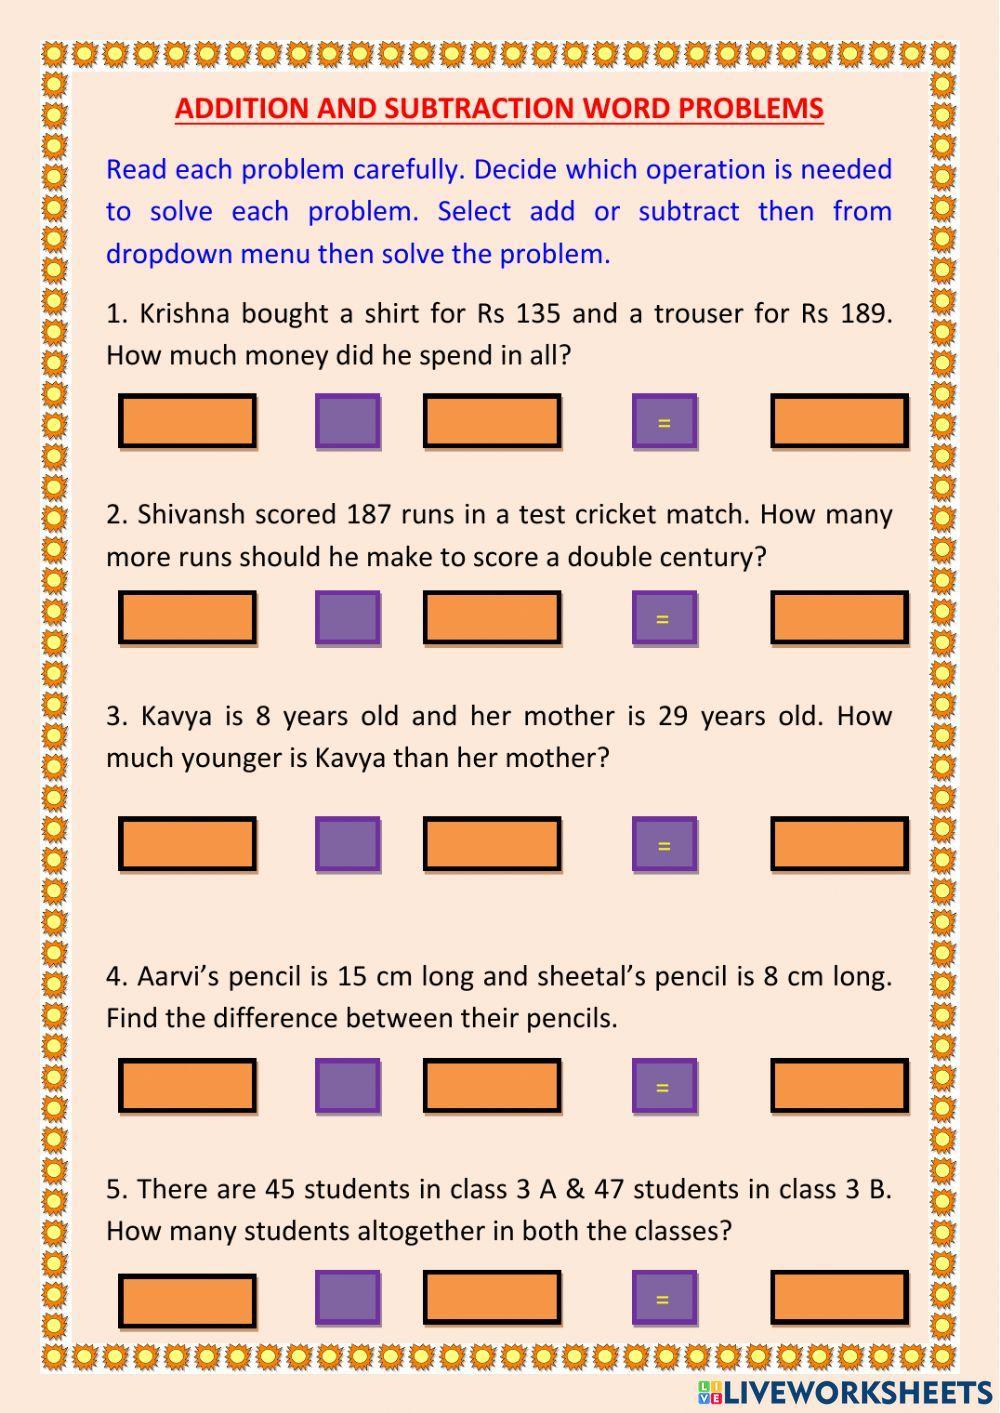 Addition and Subtraction word problems